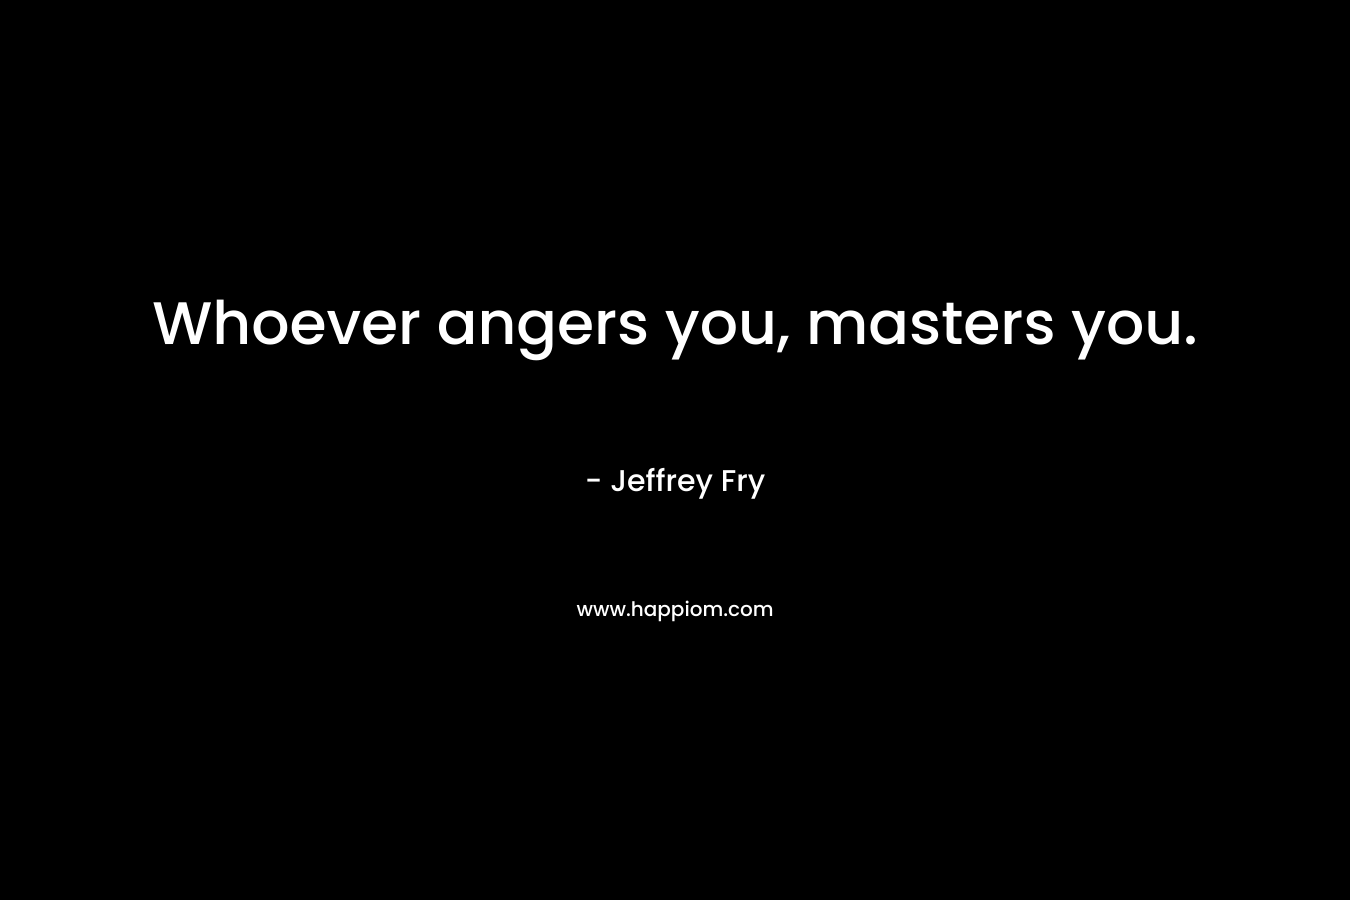 Whoever angers you, masters you.